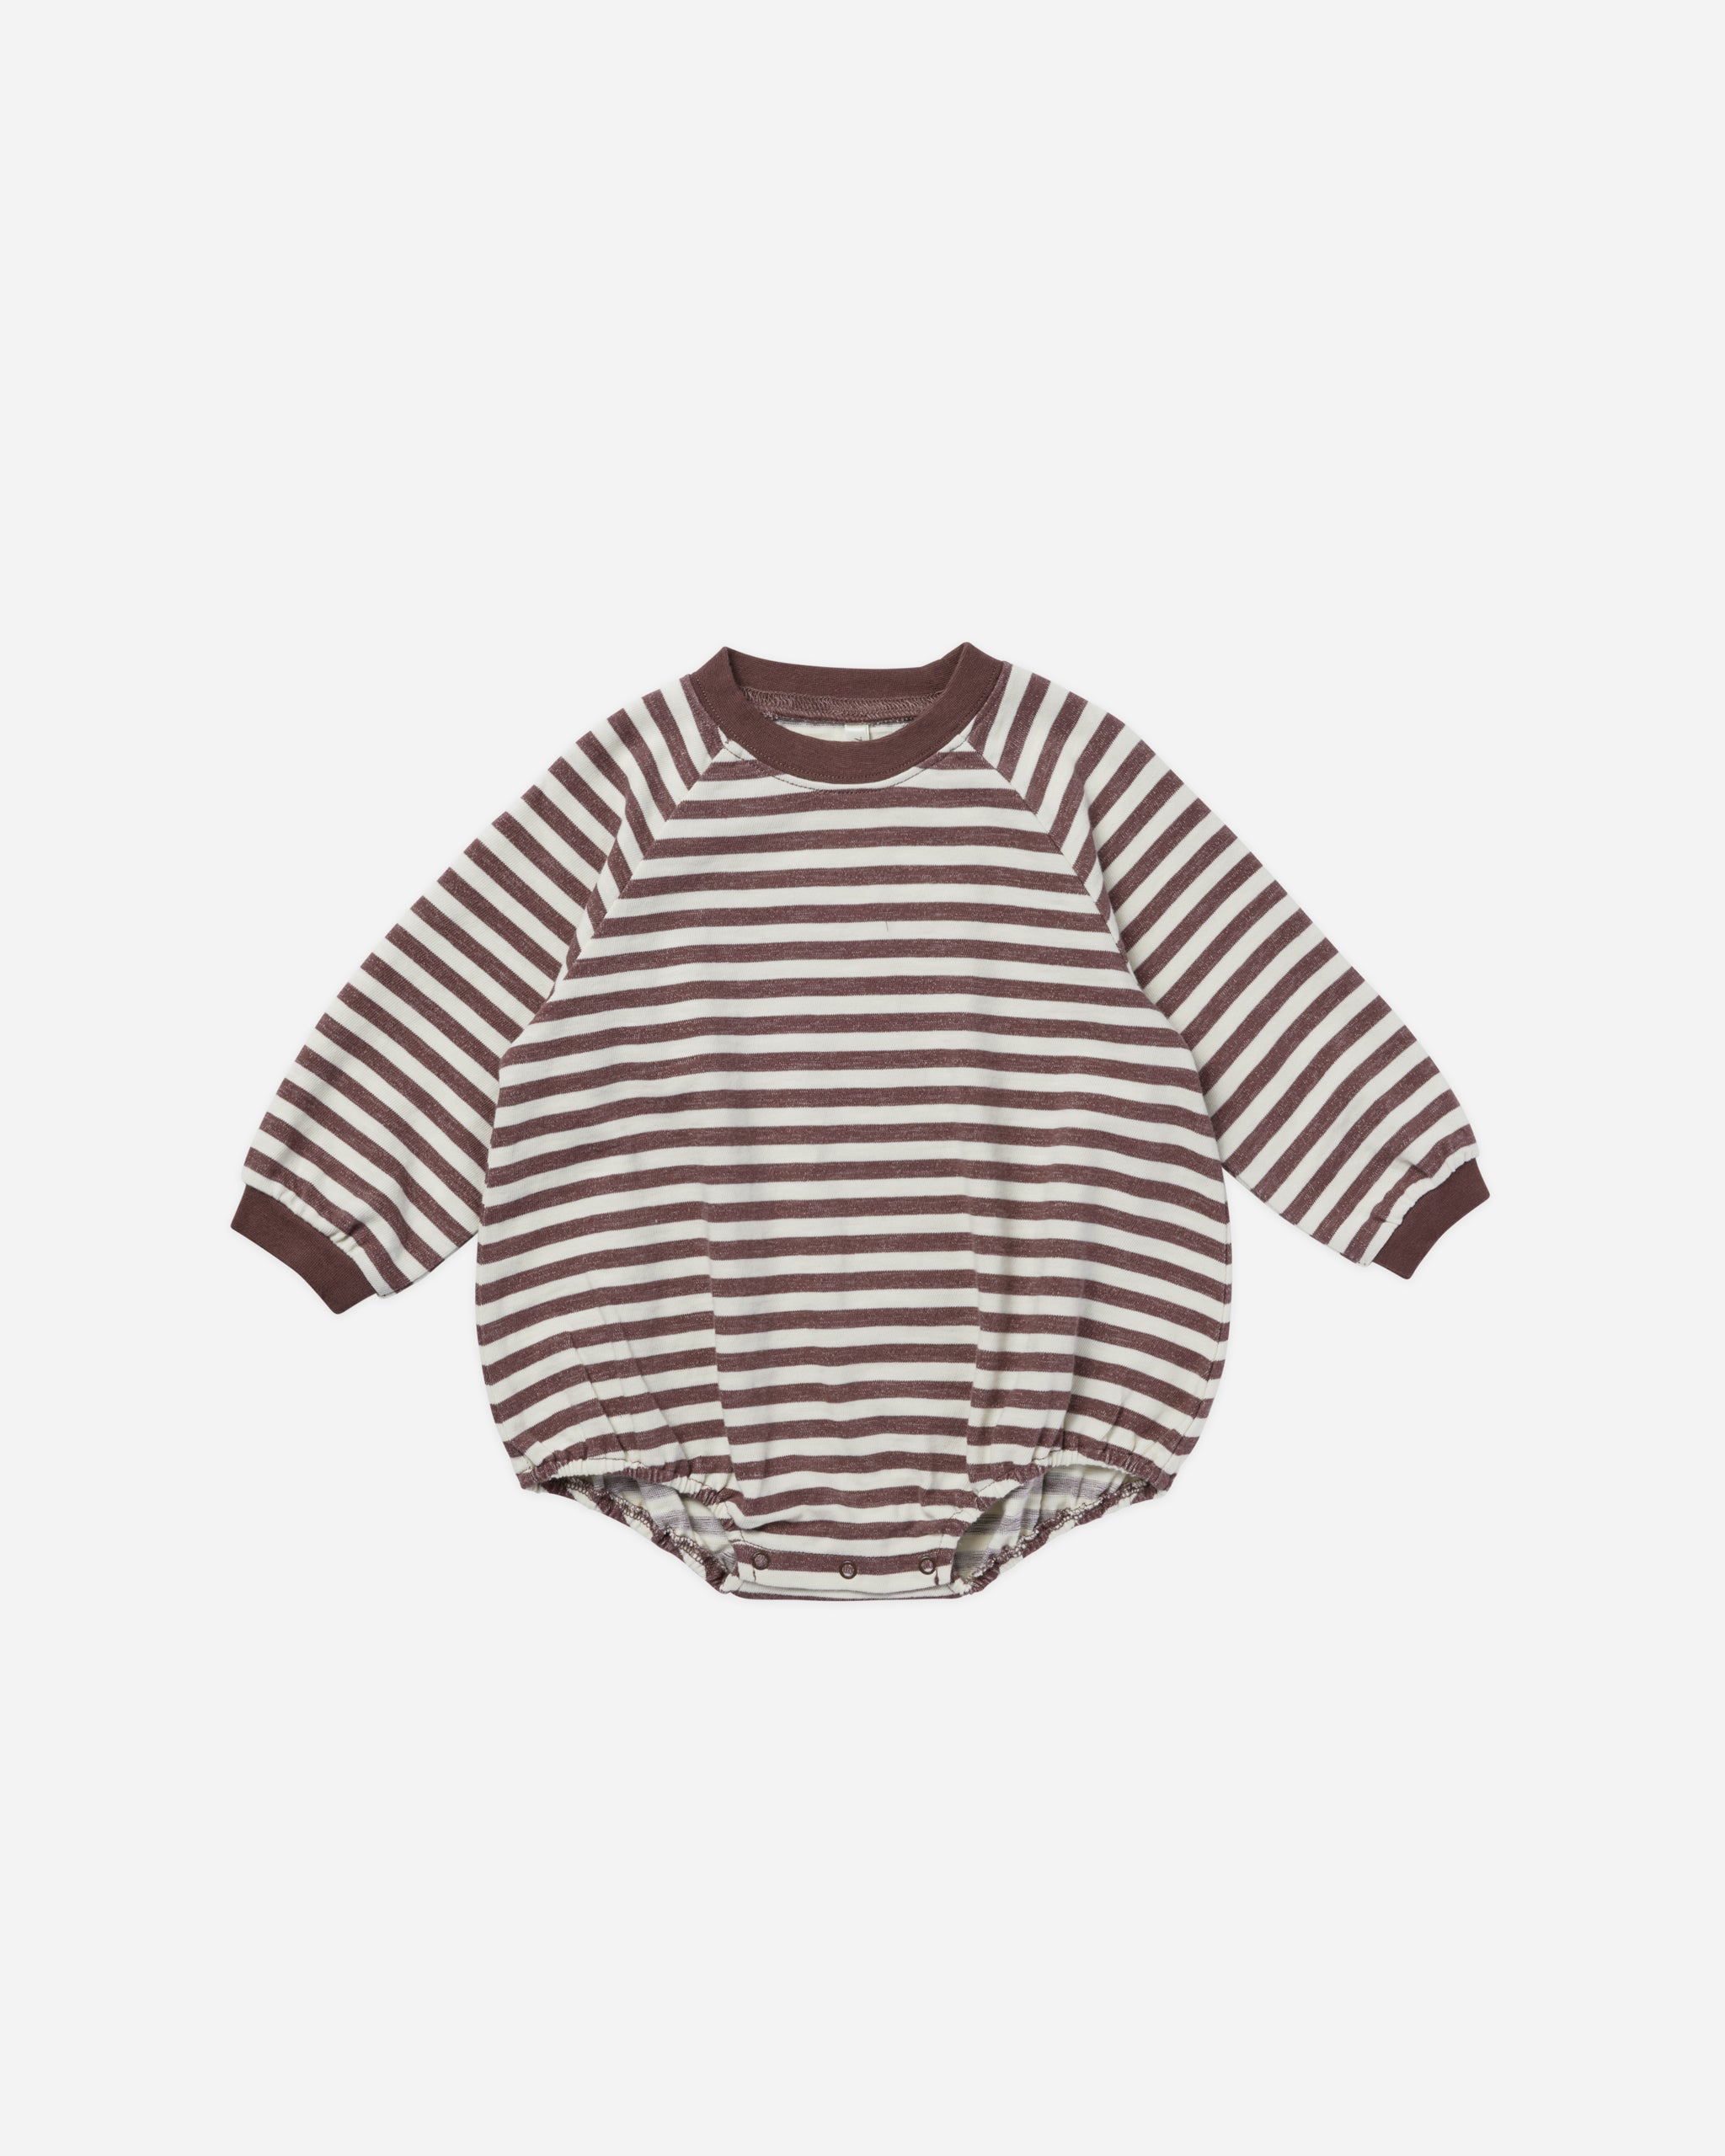 Crew Neck Romper || Plum Stripe - Rylee + Cru | Kids Clothes | Trendy Baby Clothes | Modern Infant Outfits |